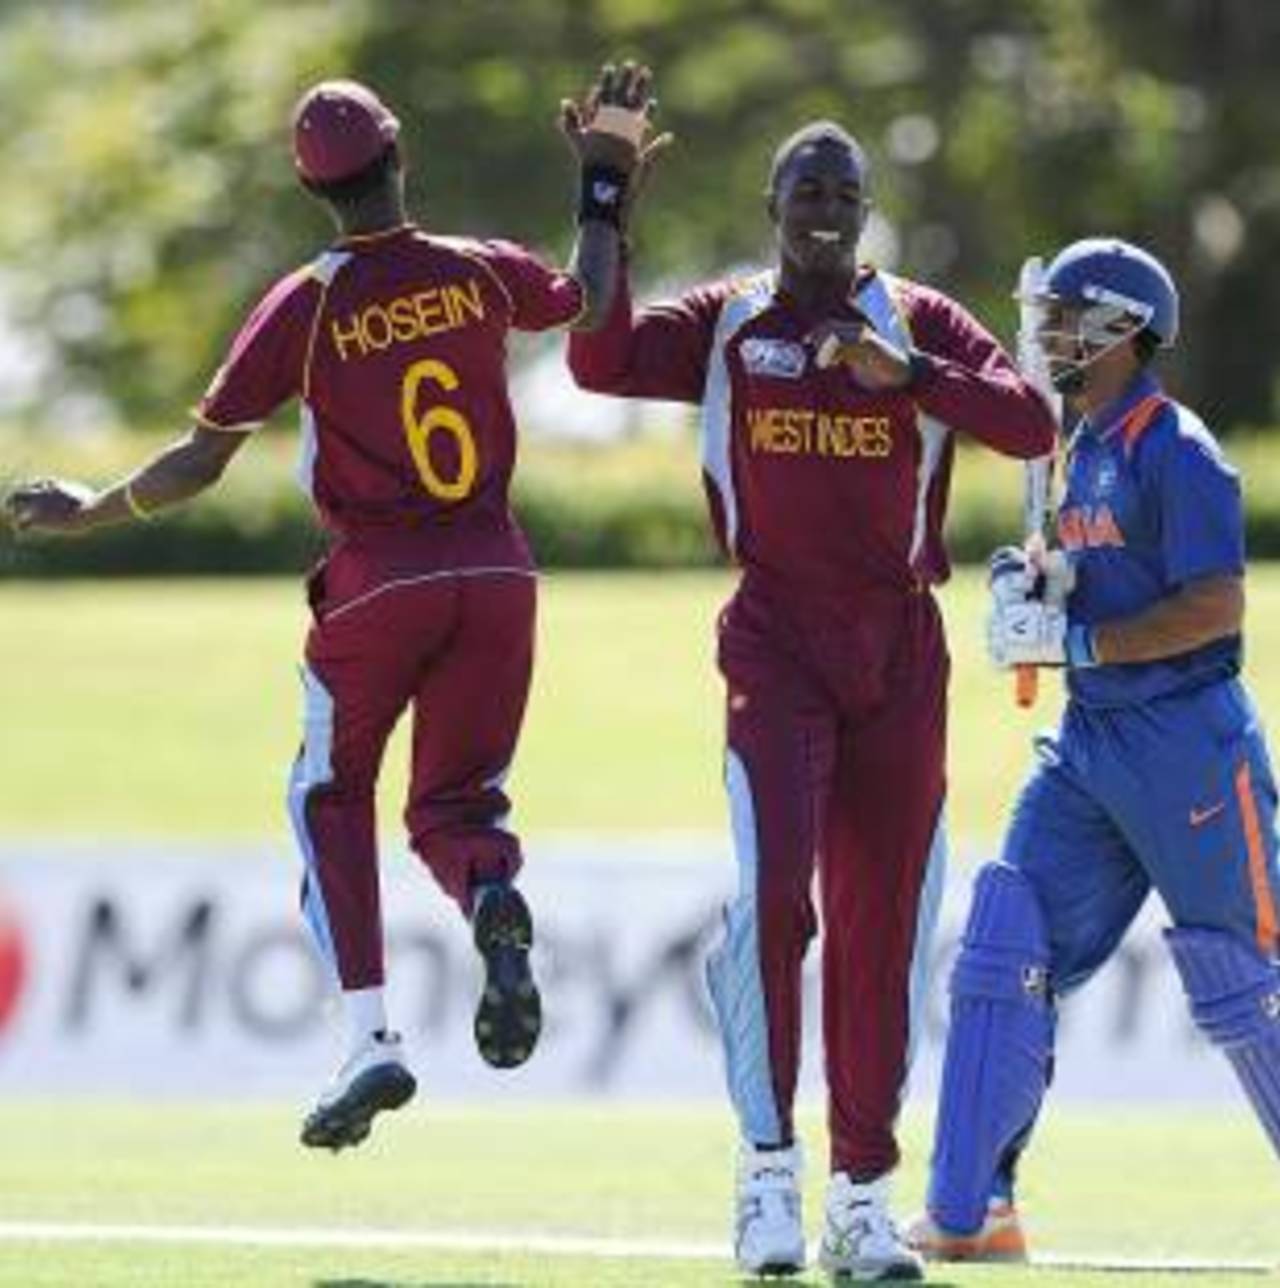 Jerome Jones picked up two wickets, India v West Indies, Group C, ICC Under-19 World Cup 2012, Townsville, August 12, 2012